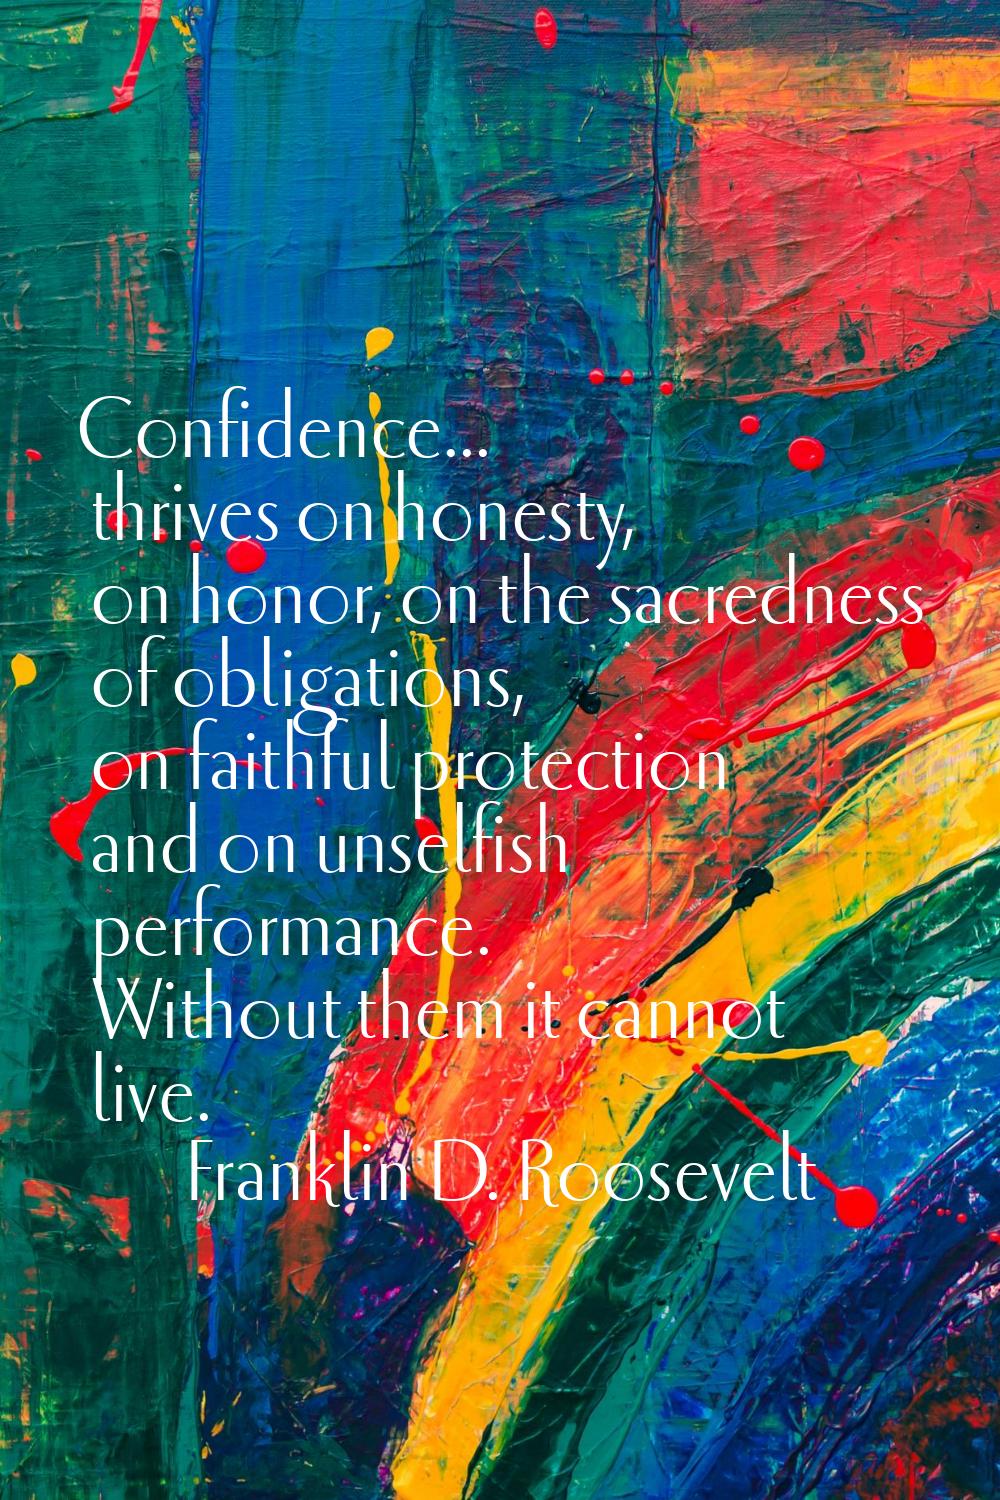 Confidence... thrives on honesty, on honor, on the sacredness of obligations, on faithful protectio